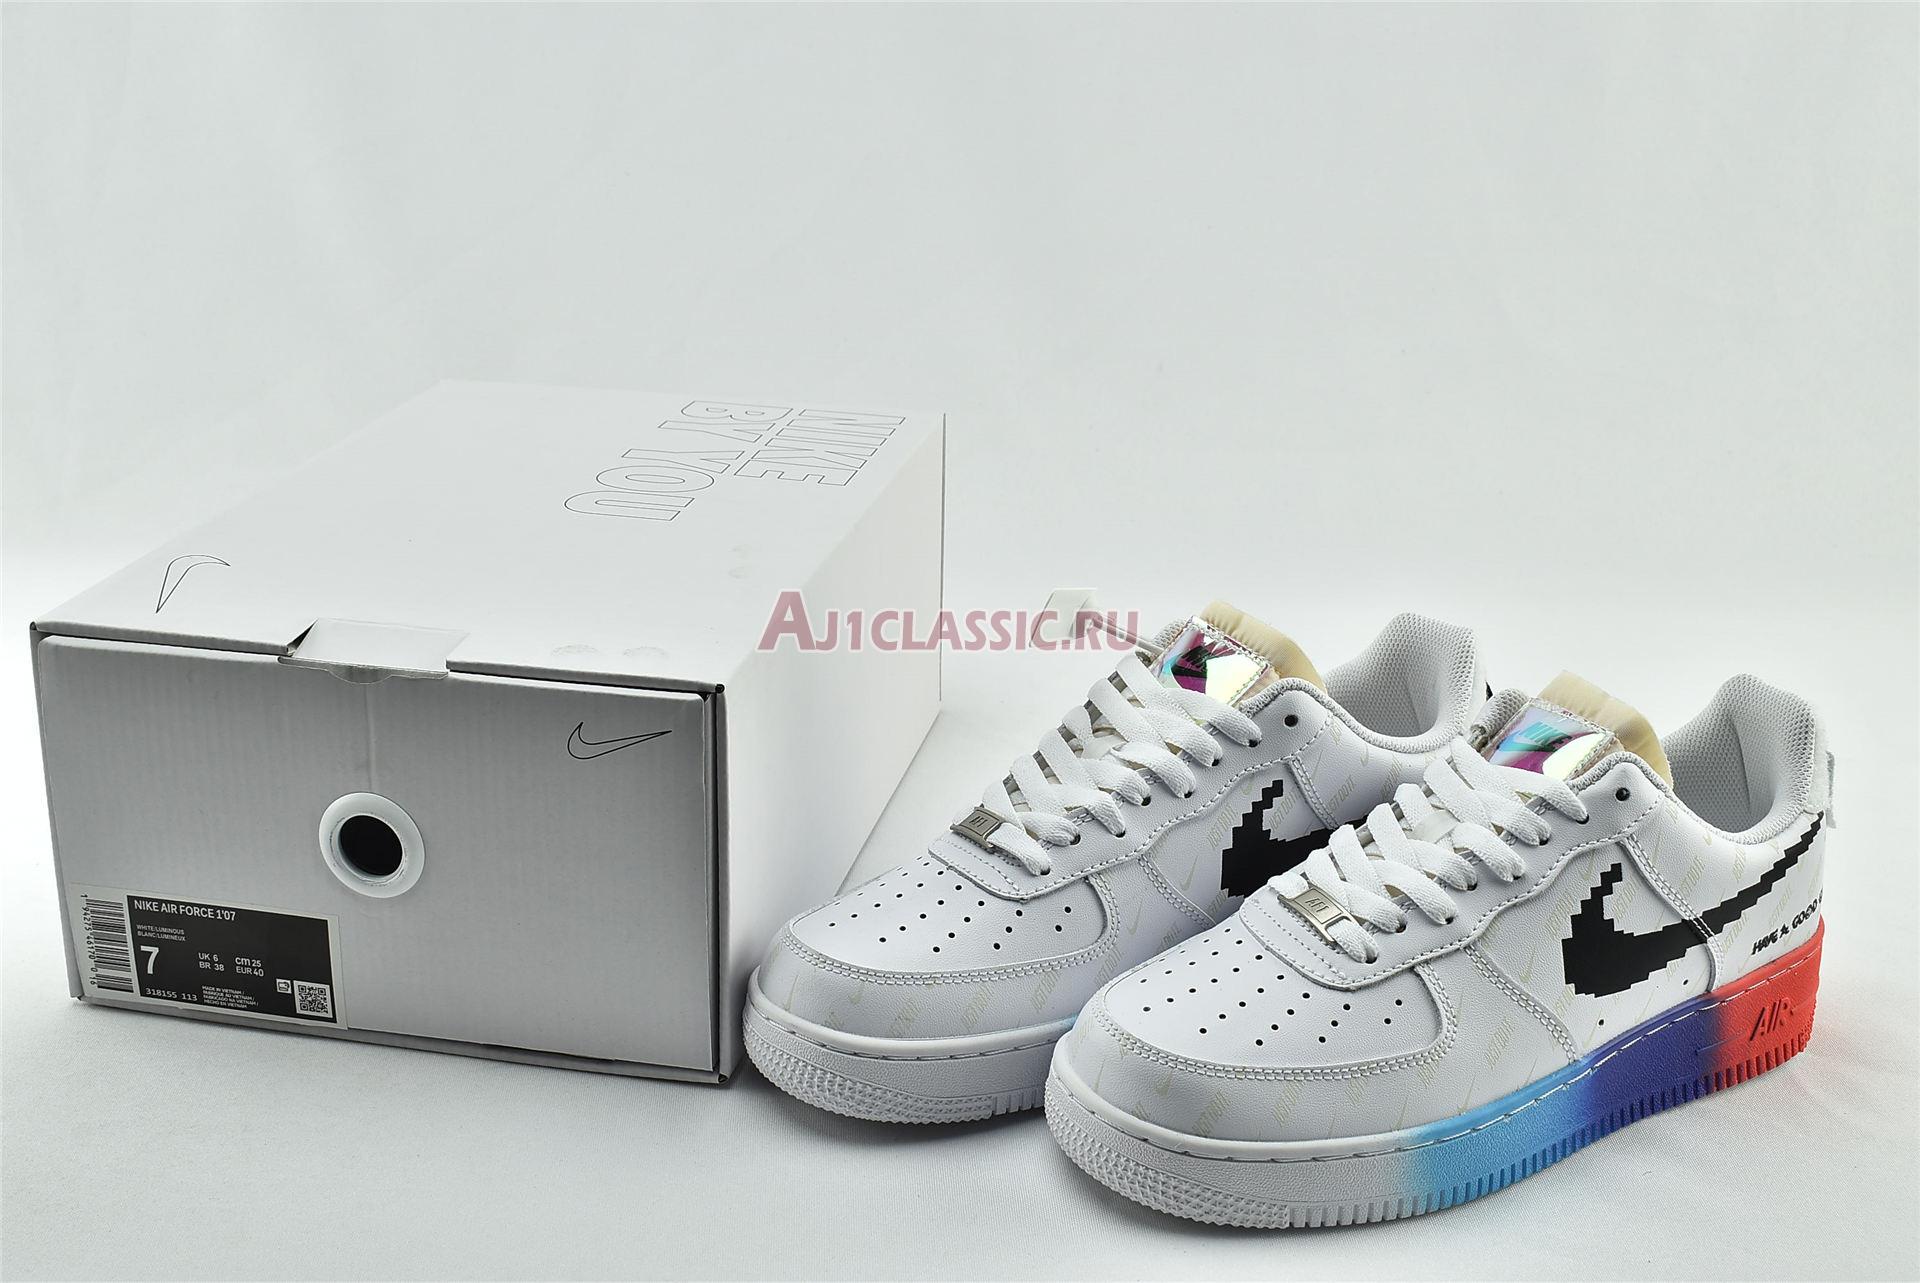 Nike Air Force 1 Low Have A Good Game 318155-113 White/White/Bright Crimson/Black Sneakers